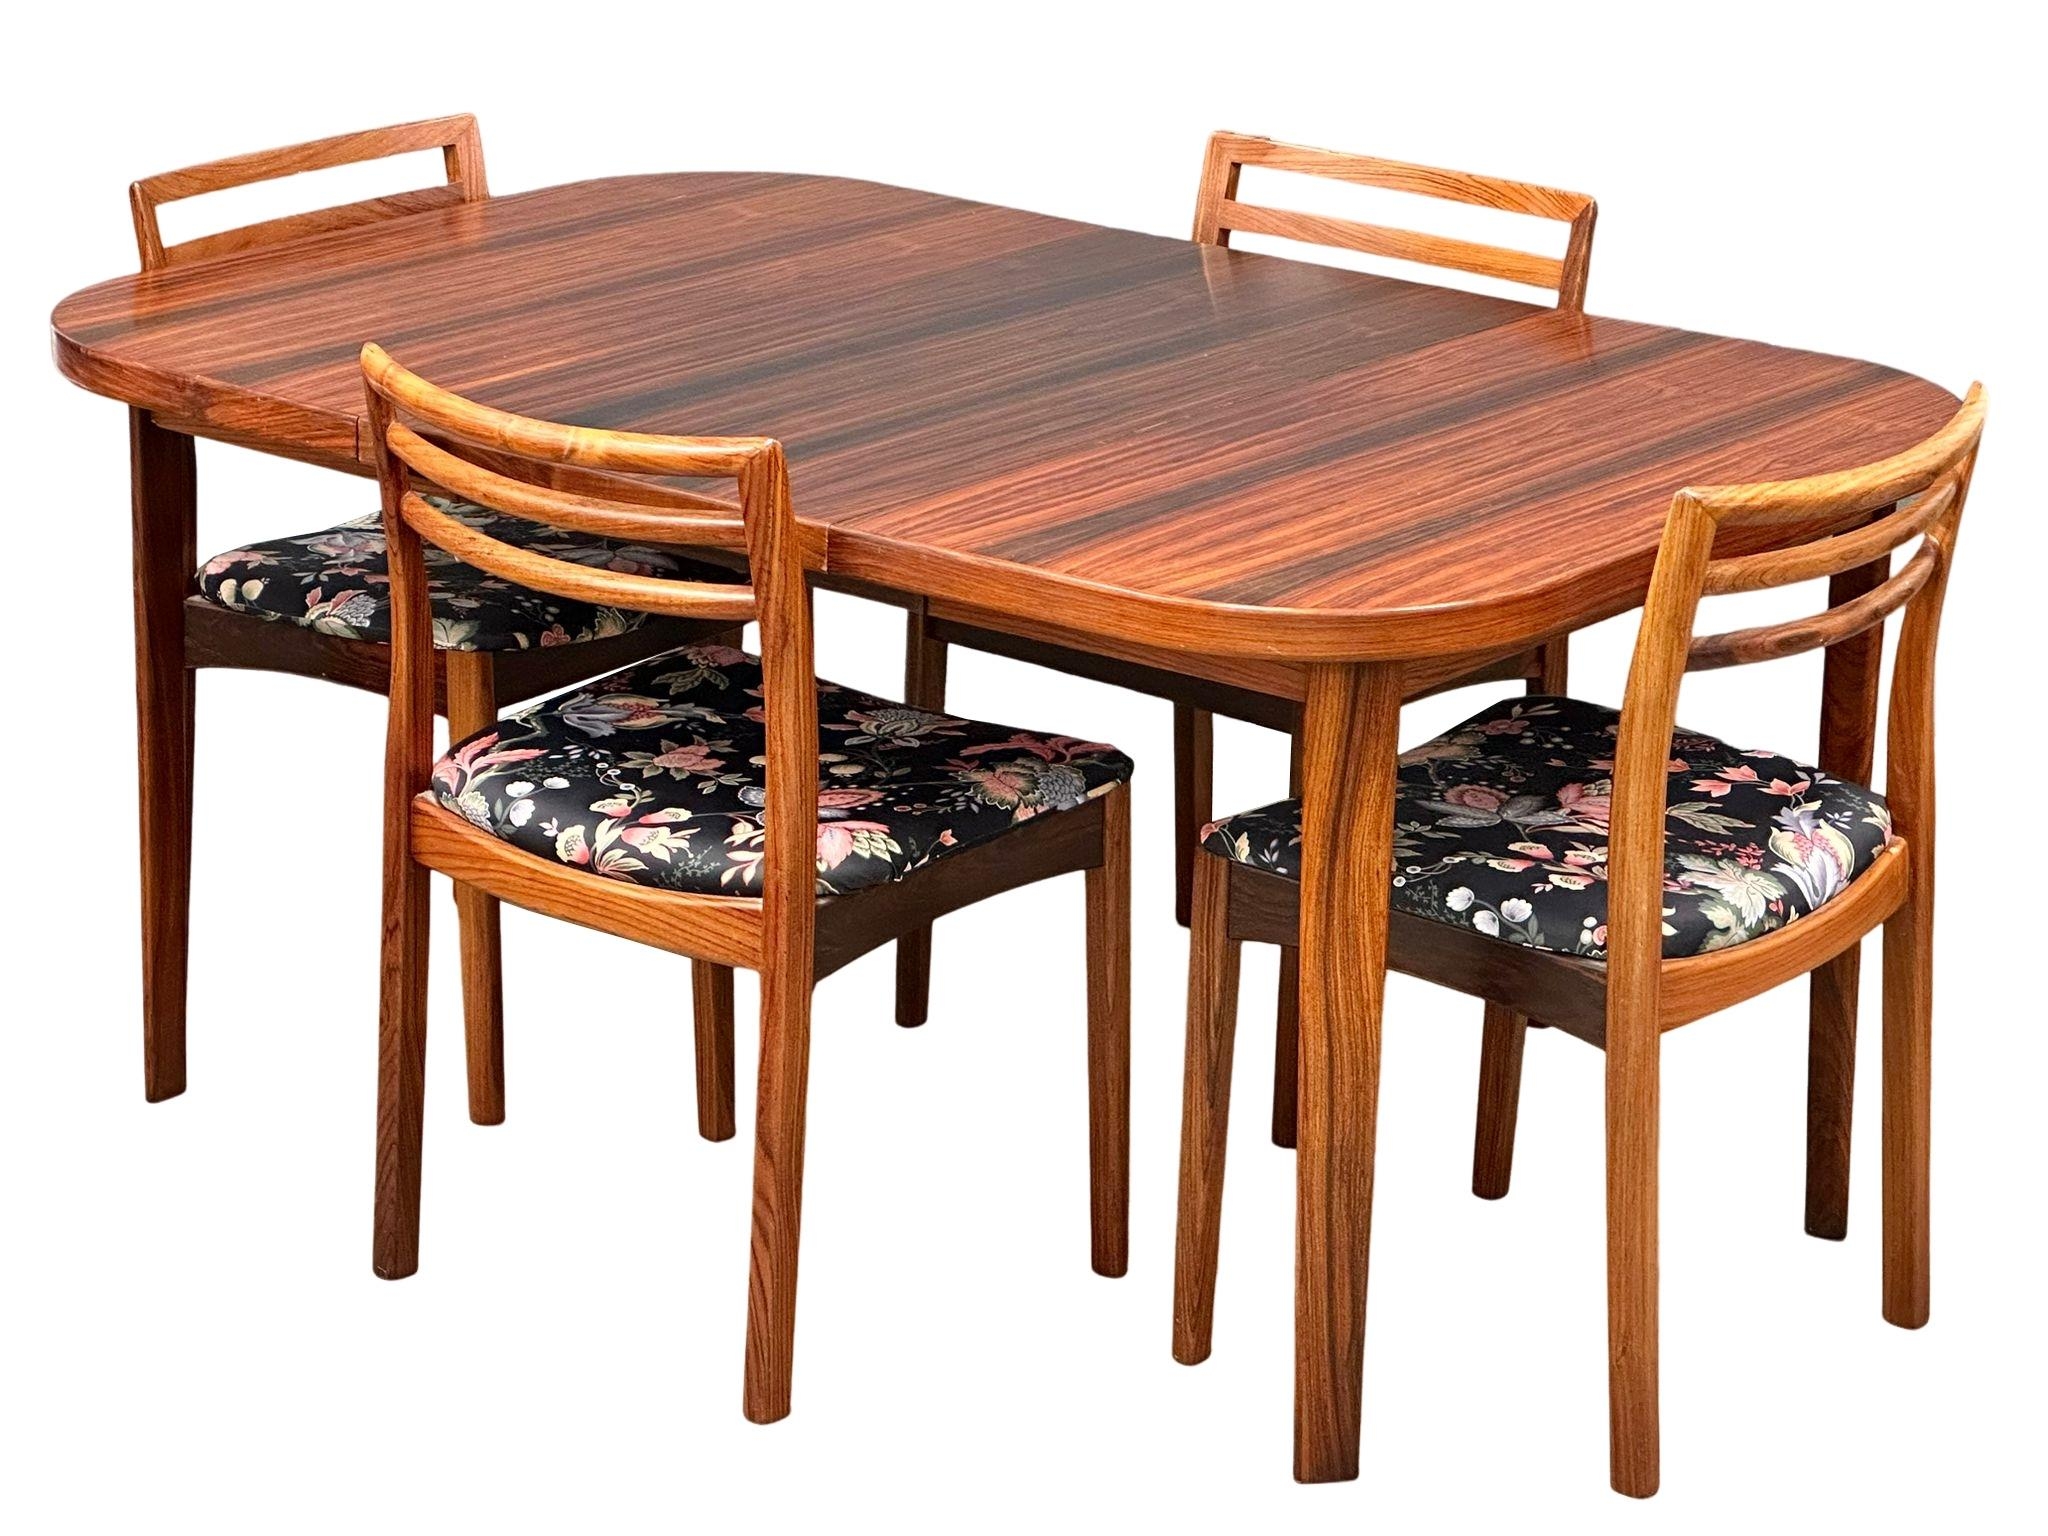 A Danish Mid Century rosewood extending dining table and 4 chairs. Closed 101x101x73cm. 1 leaf